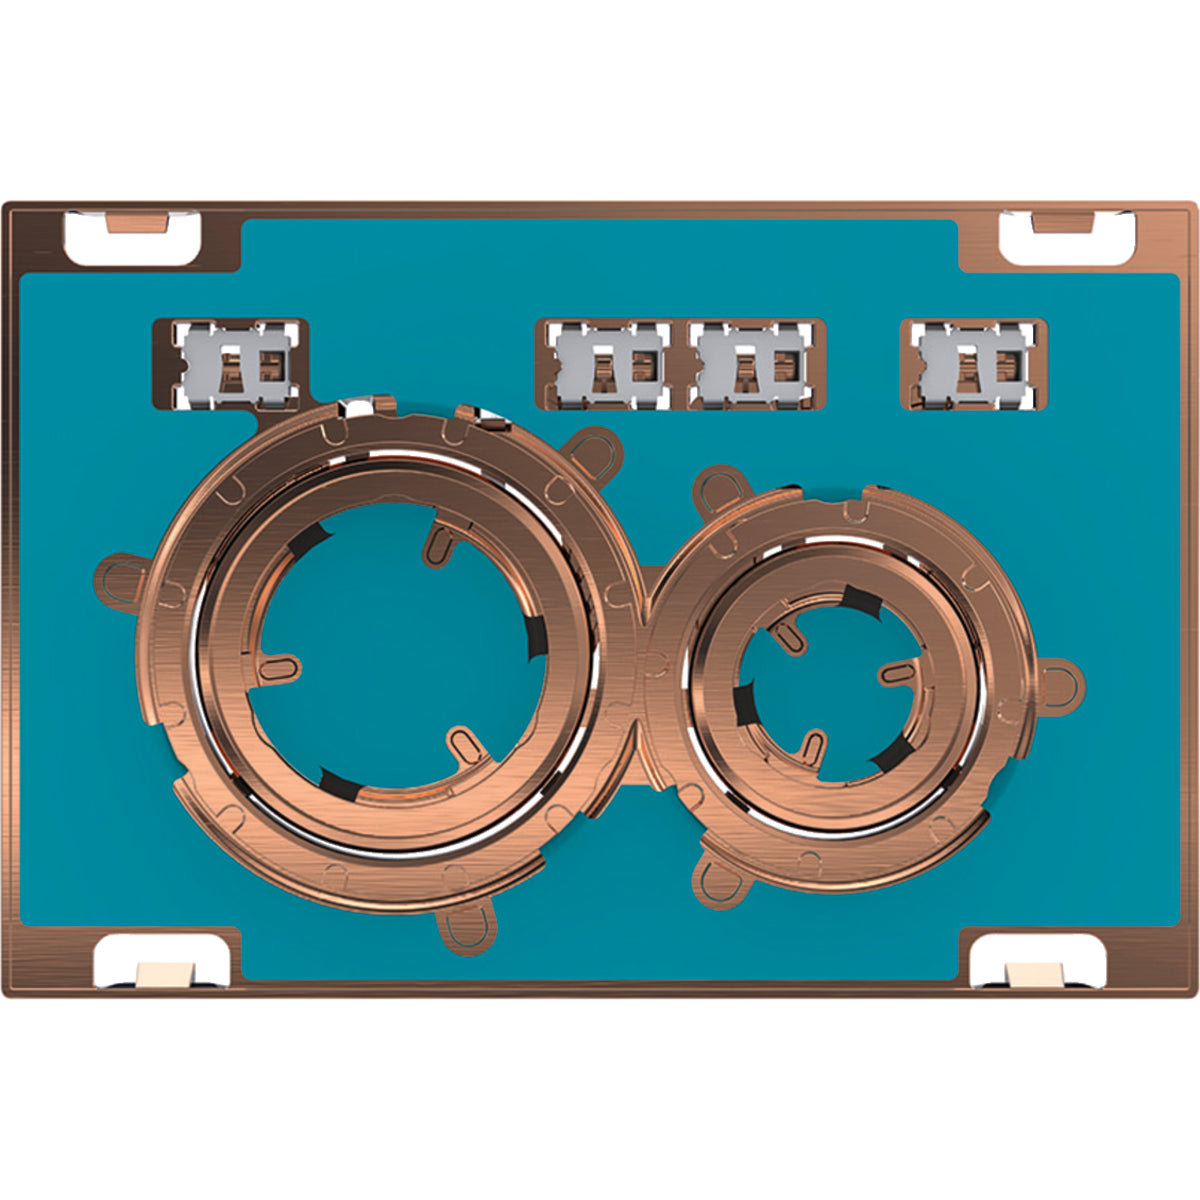 Geberit 115.650.00.1- Geberit actuator plate Sigma21 for dual flush, metal colour red gold: red gold, customised - FaucetExpress.ca